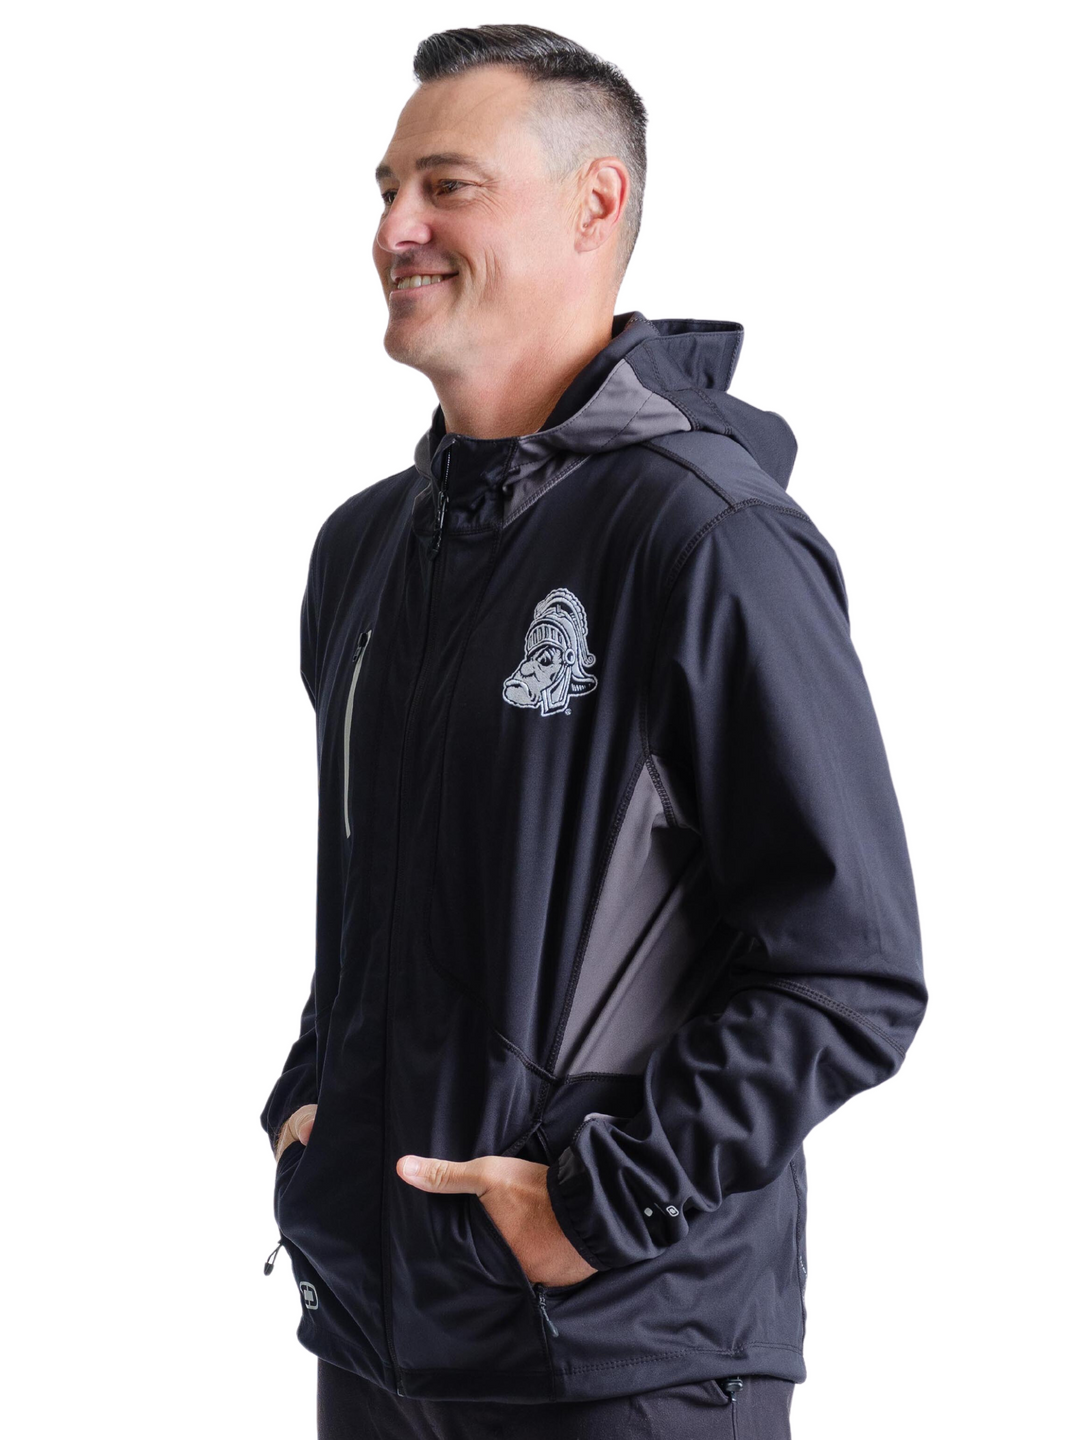 Michigan State Spartans Gruff Sparty Embroidered Men's OGIO Endurance Soft Shell Jacket